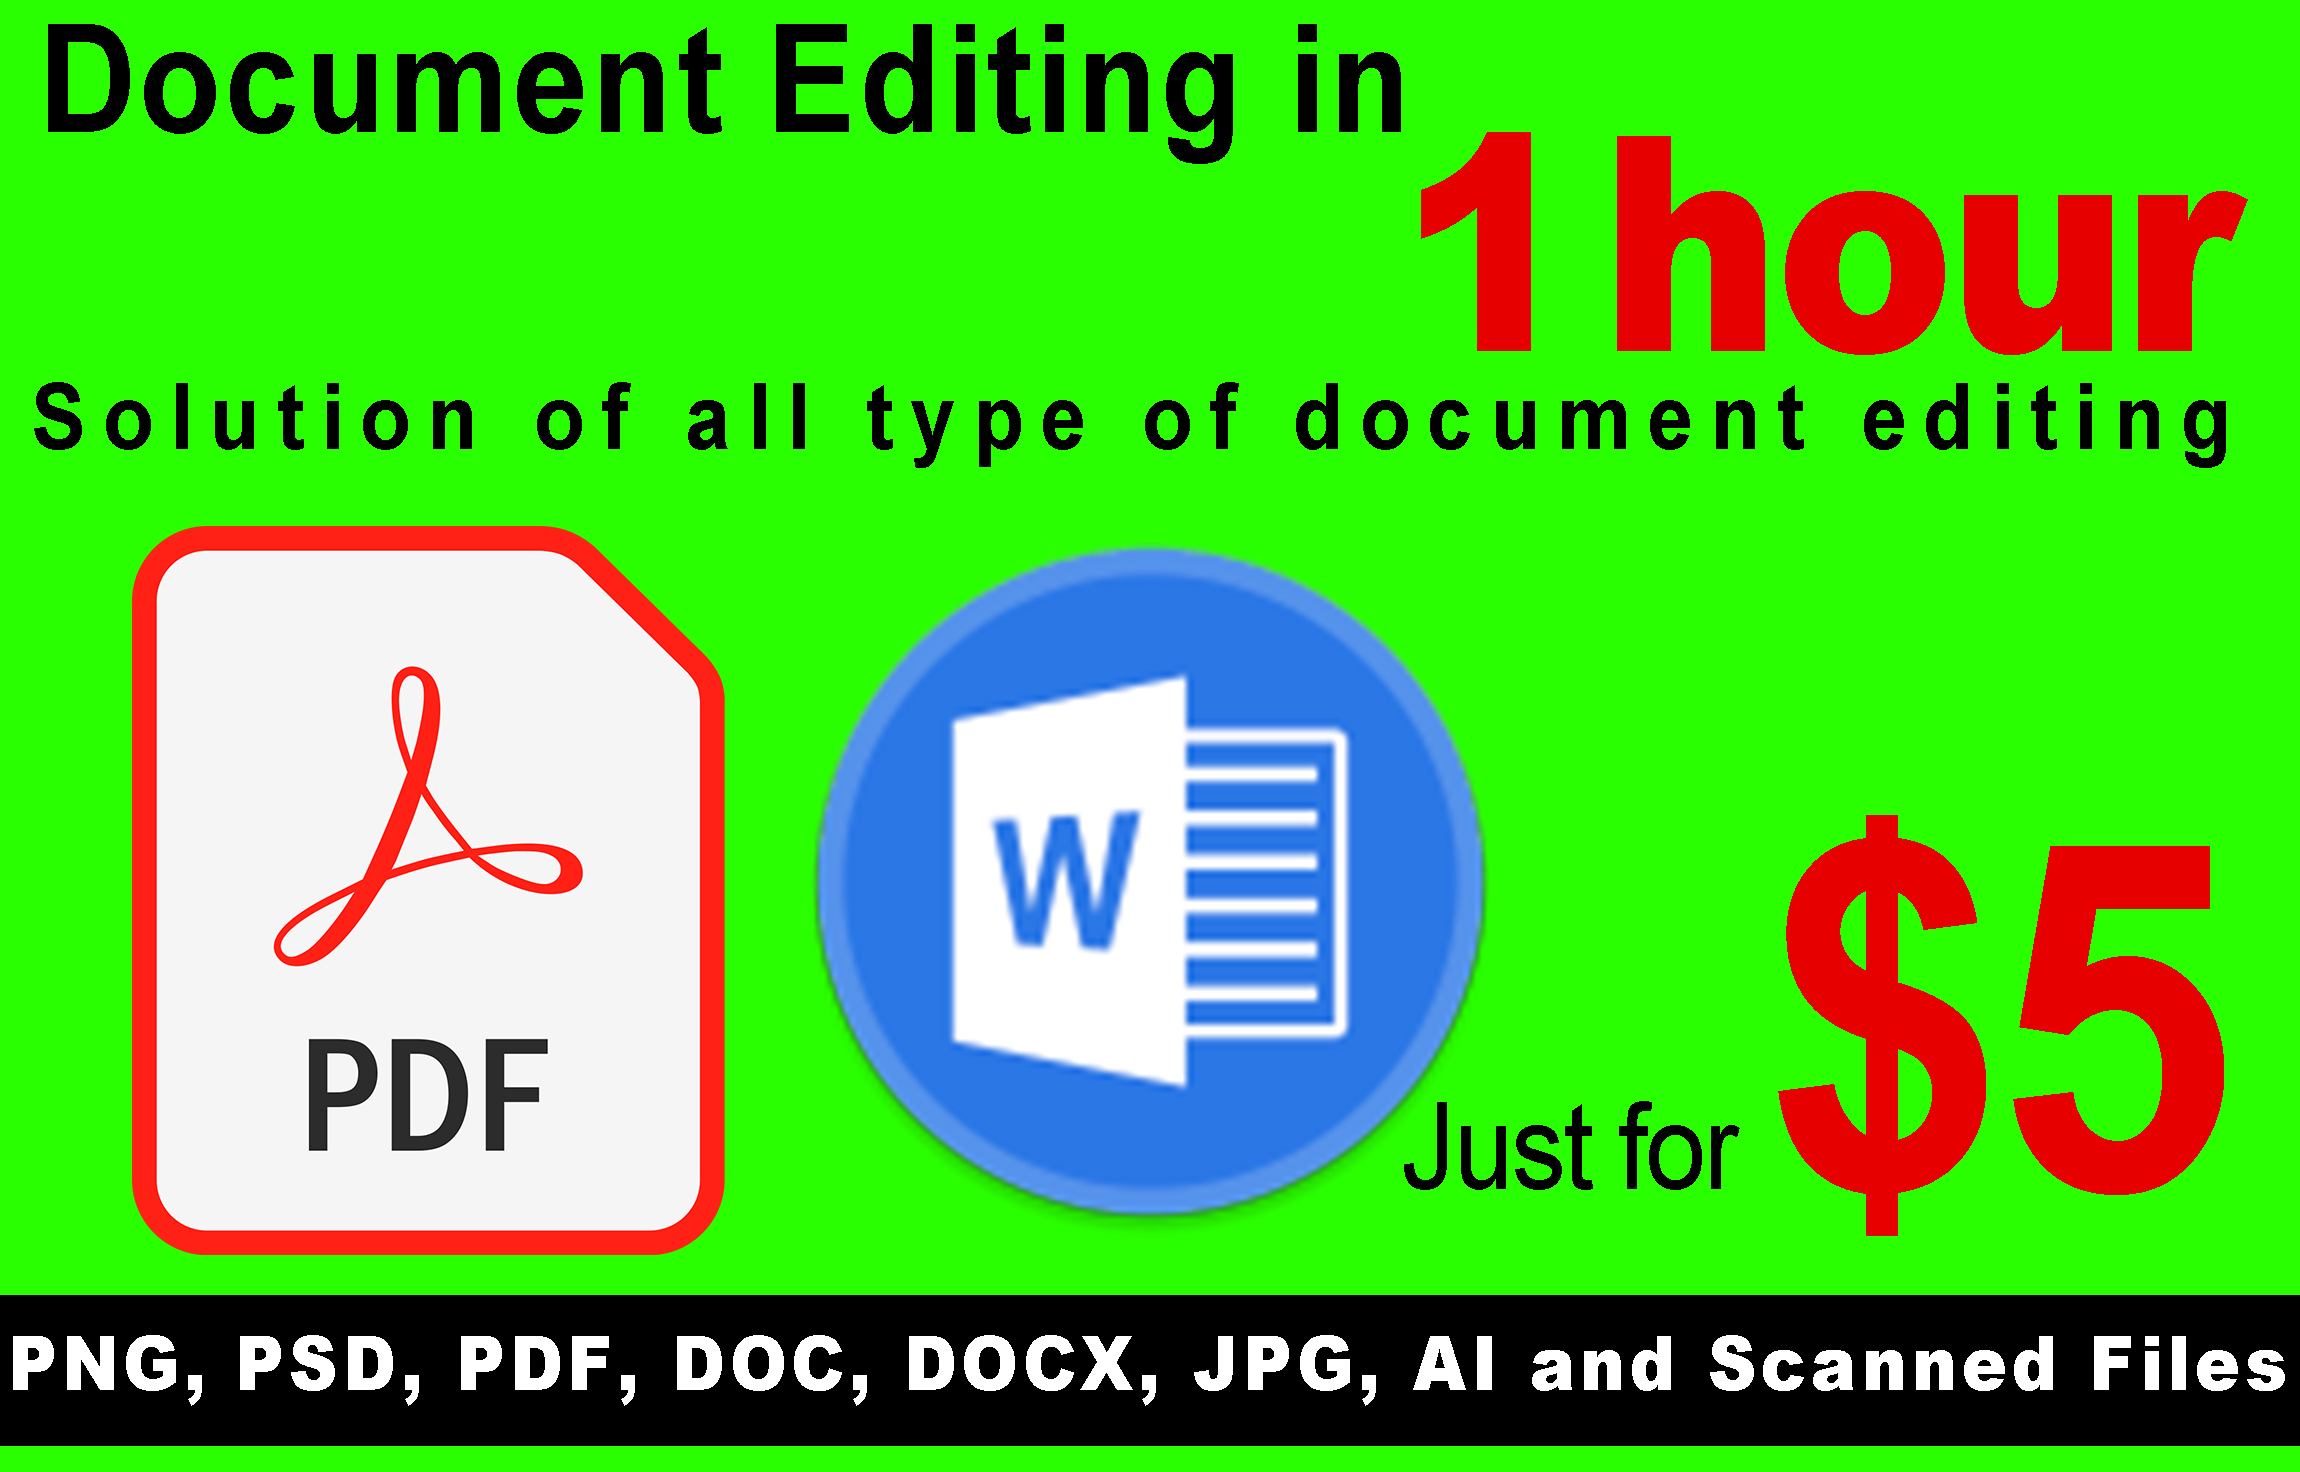 I will do any type of Photoshop editing of images and documents